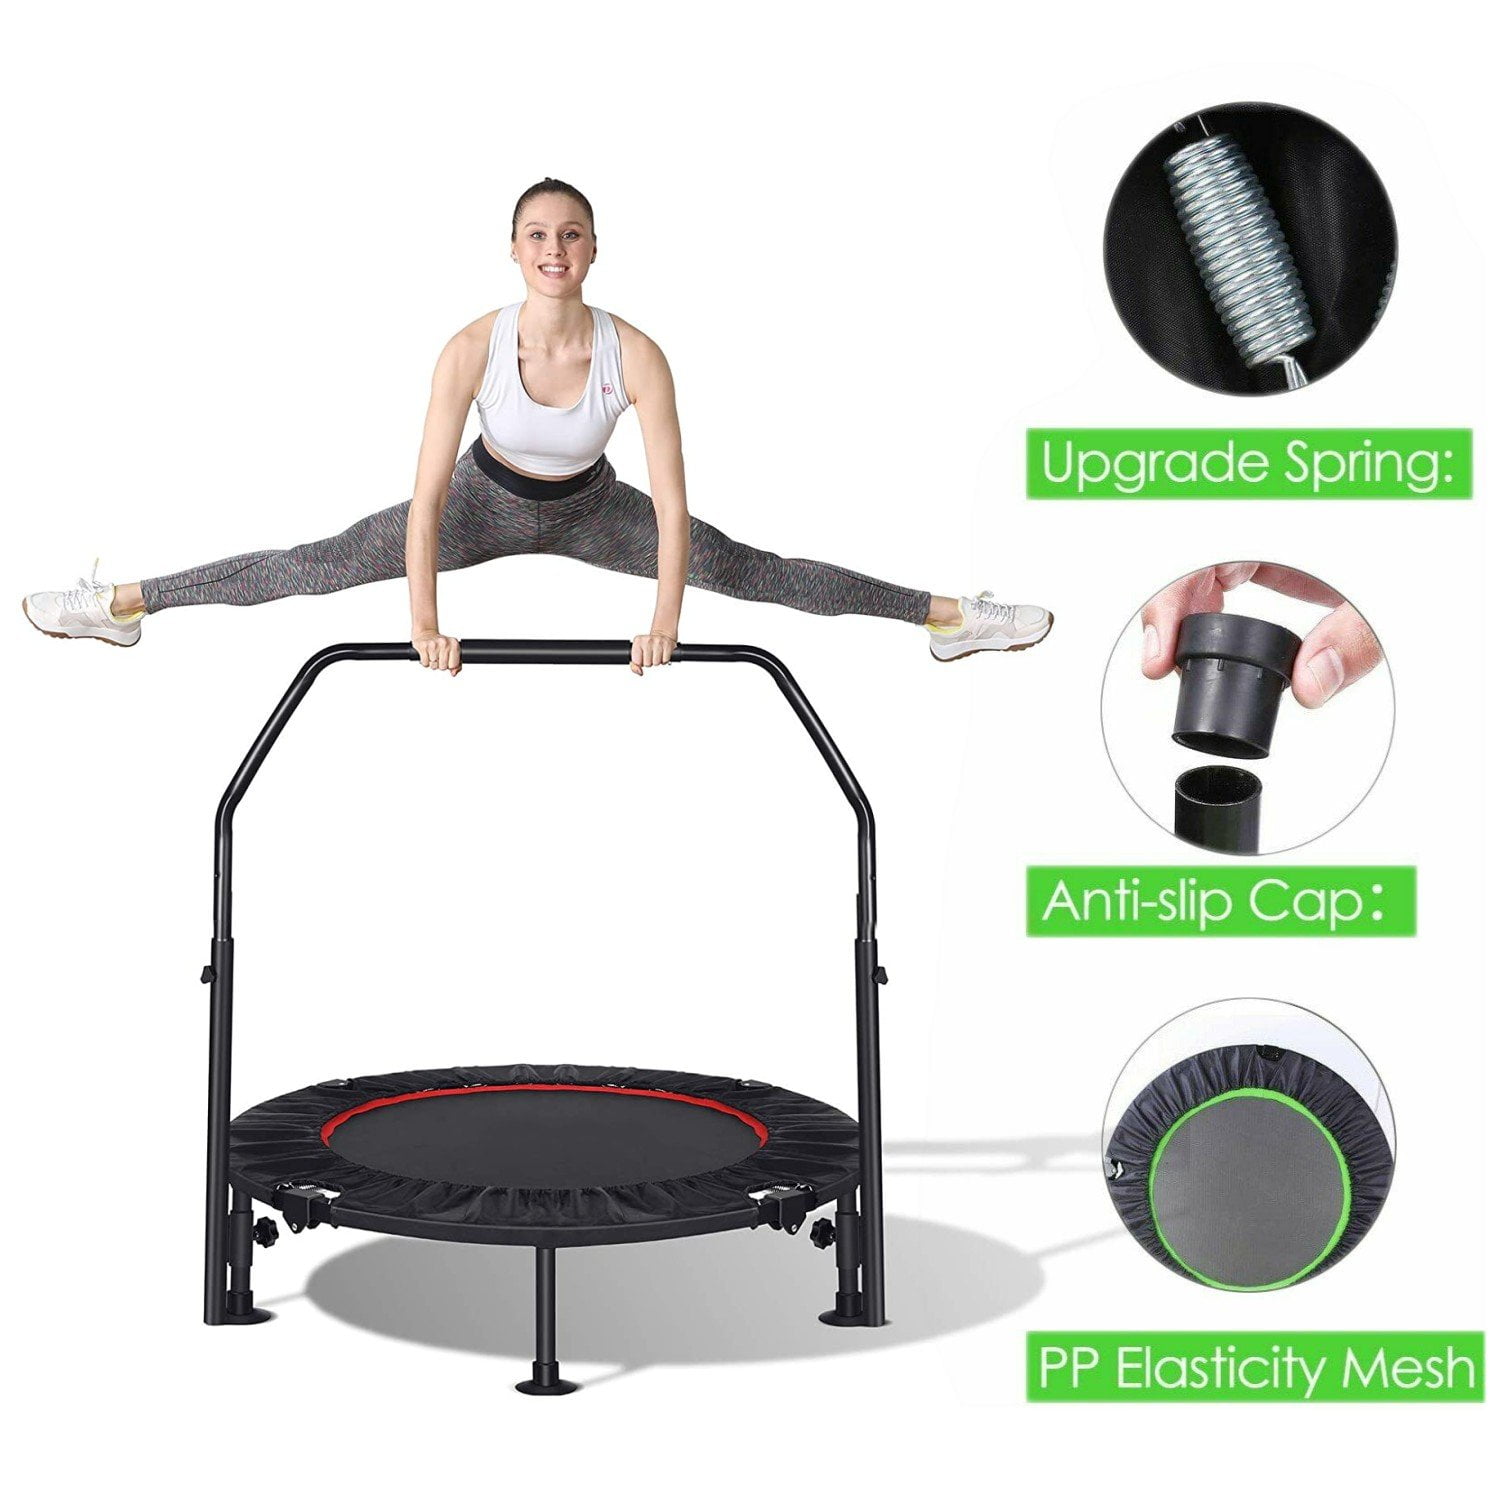 GARTIO 40" Foldable Mini Trampoline, Fitness Rebounder for Adults, Exercise Recreational Trampoline W/ 3 Level Adjustable Foam Handrail & Safety Pad, Indoor Outdoor, 330lbs